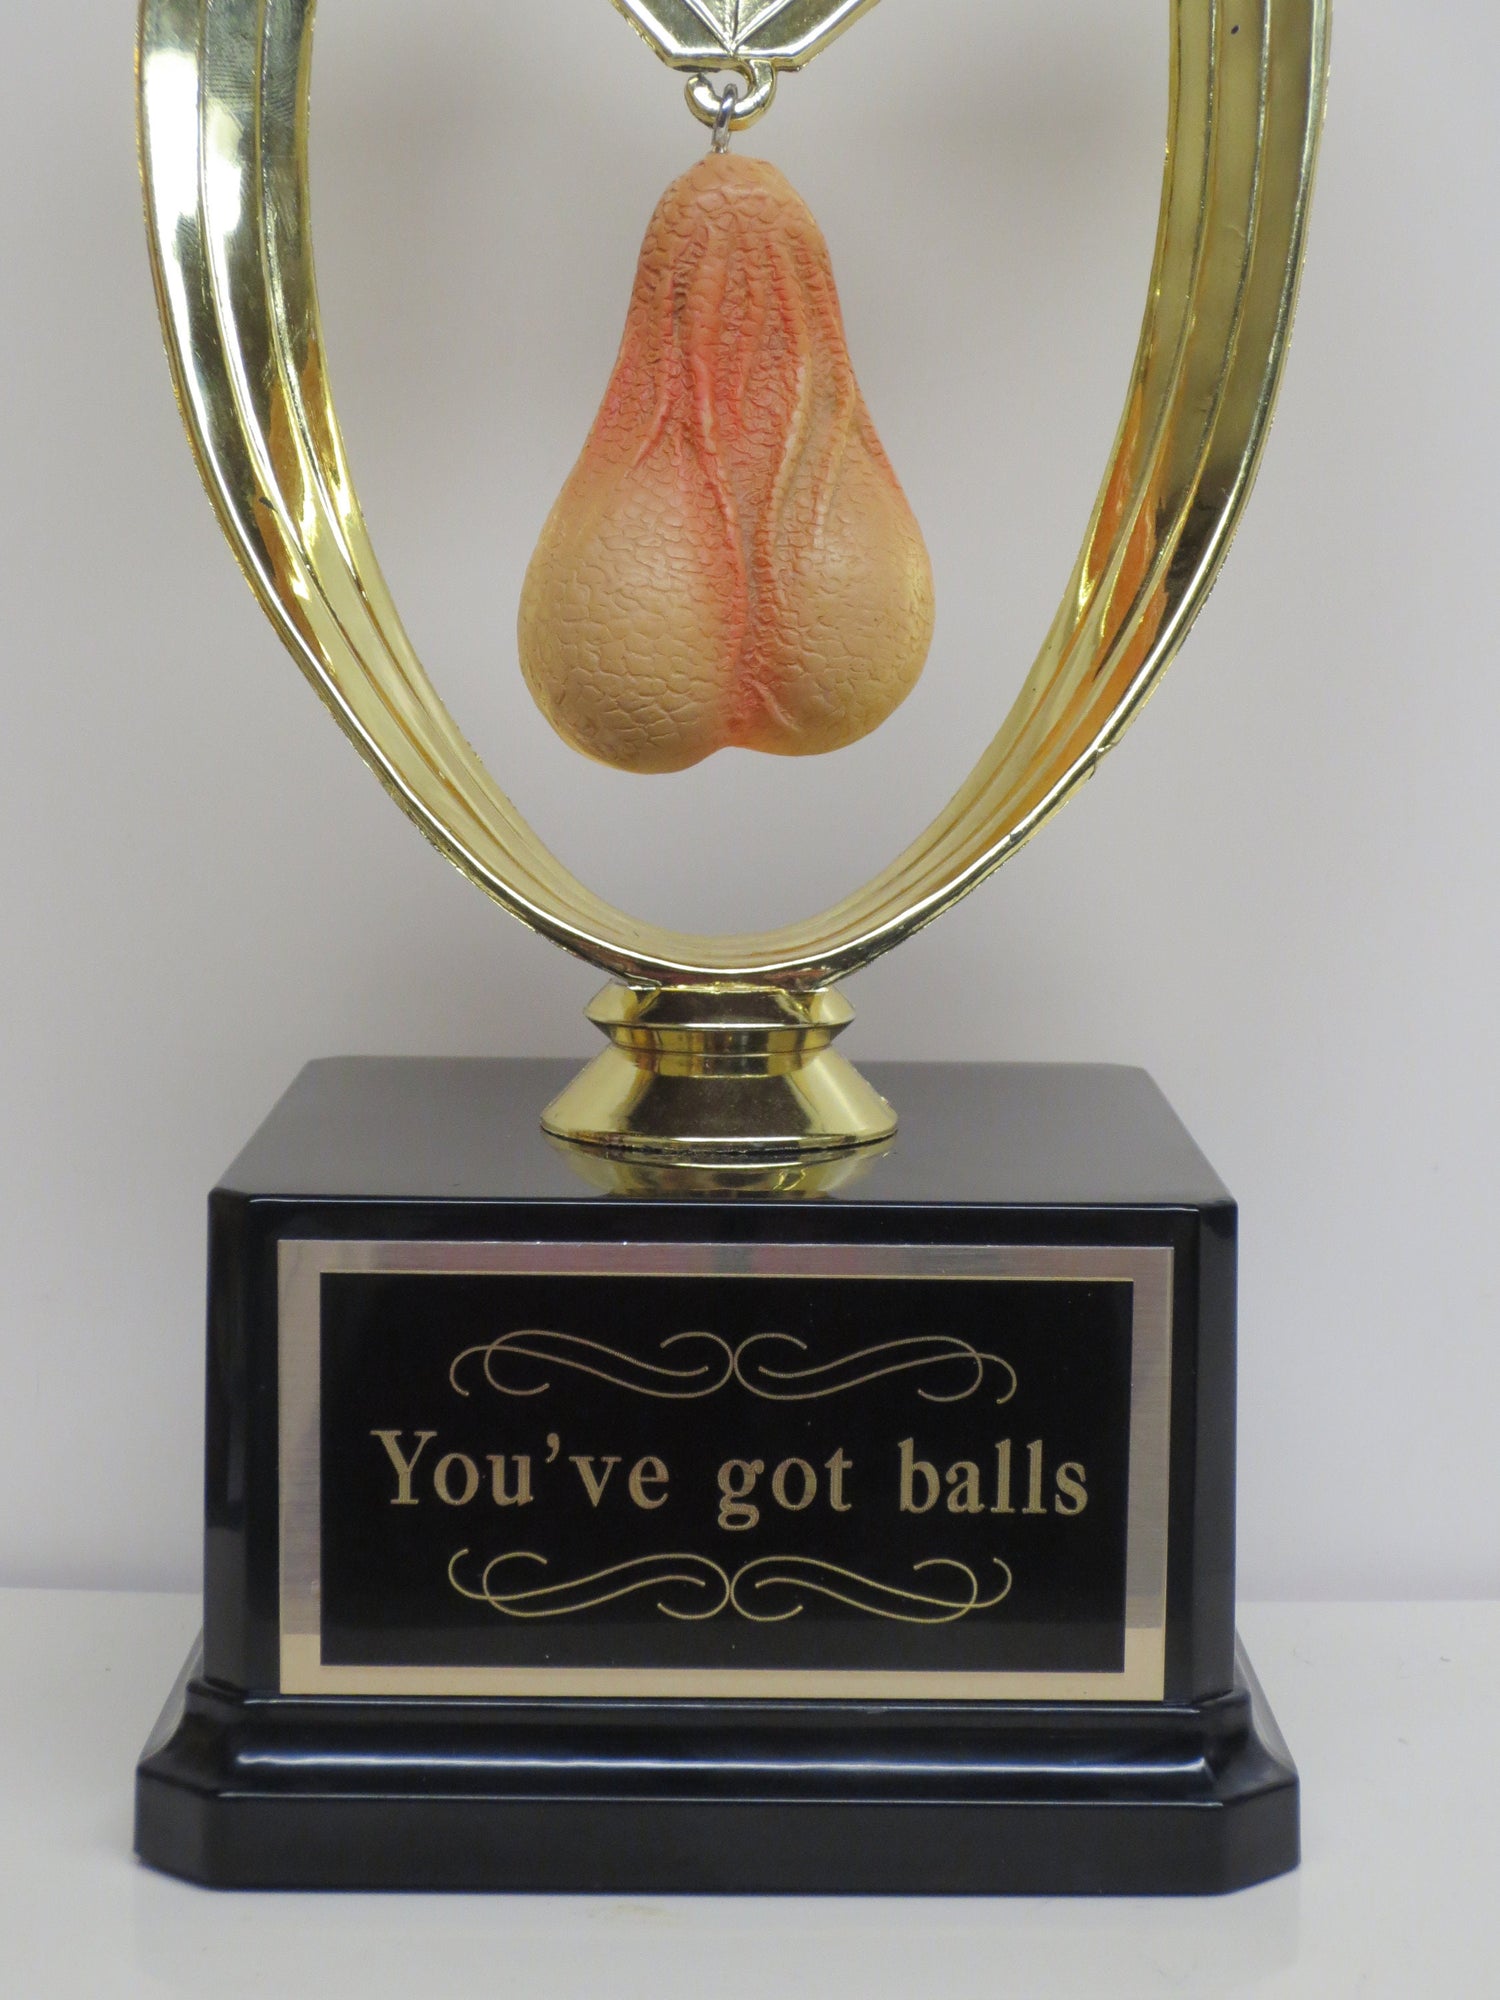 FFL Trophy Awww Nuts! Last Place Loser Sacko Grow A Pair You've Got Balls Funny Trophy Adult Humor Gag Gift Testicle Penis Fantasy Football